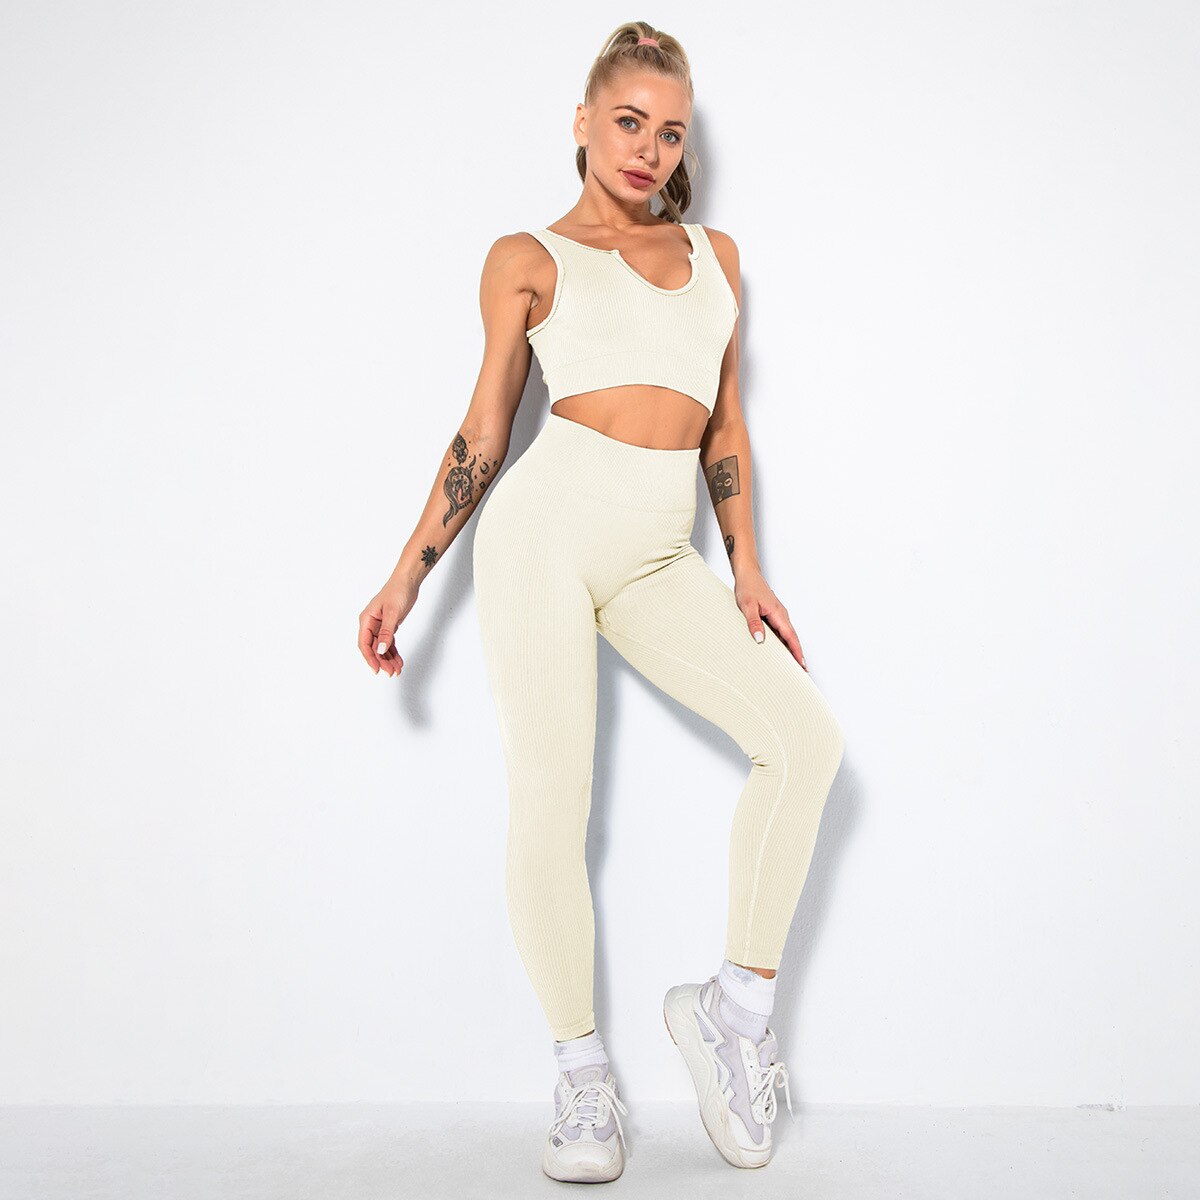 Gym Set Summer 2 Piece Outfit Ribbed Sport Bra Leggings Seamless Workout Set Fitness Active Wear Tracksuit Women Yoga Clothing